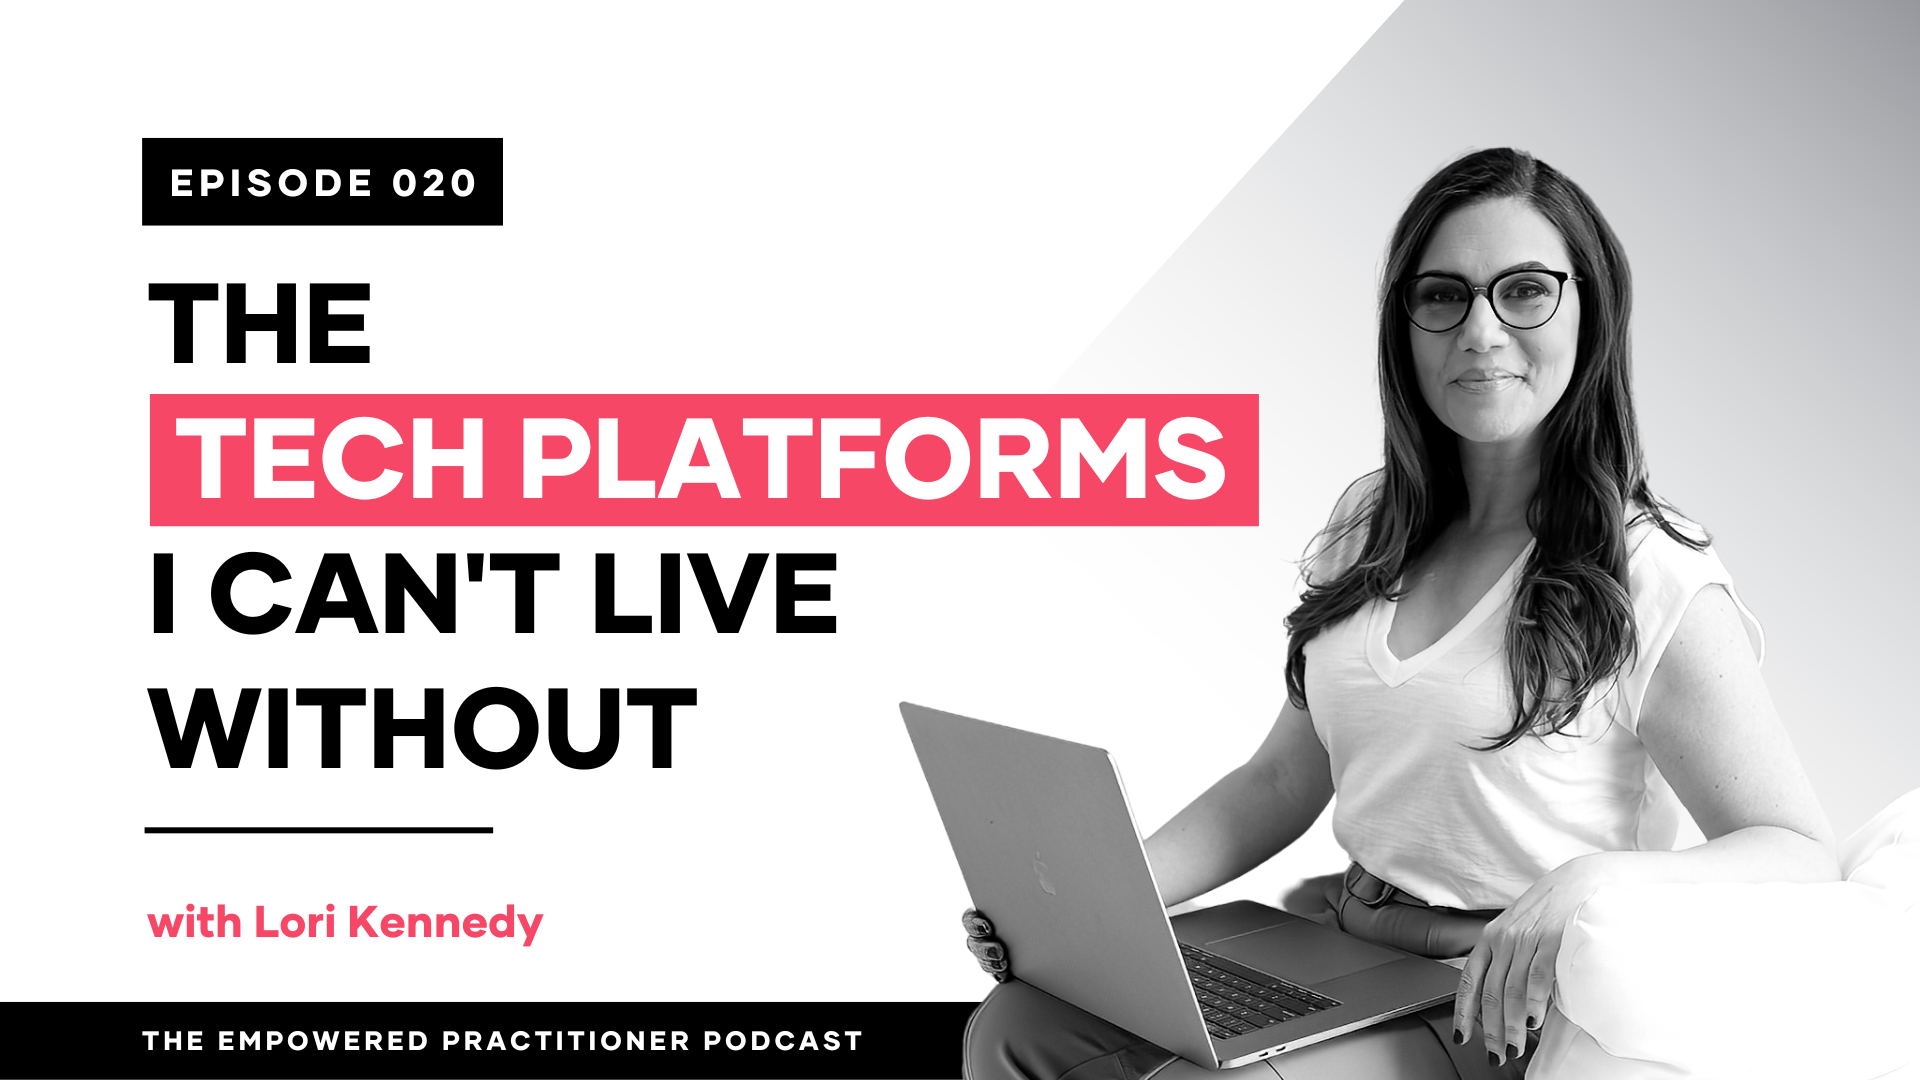 The Tech Platforms I can't live without